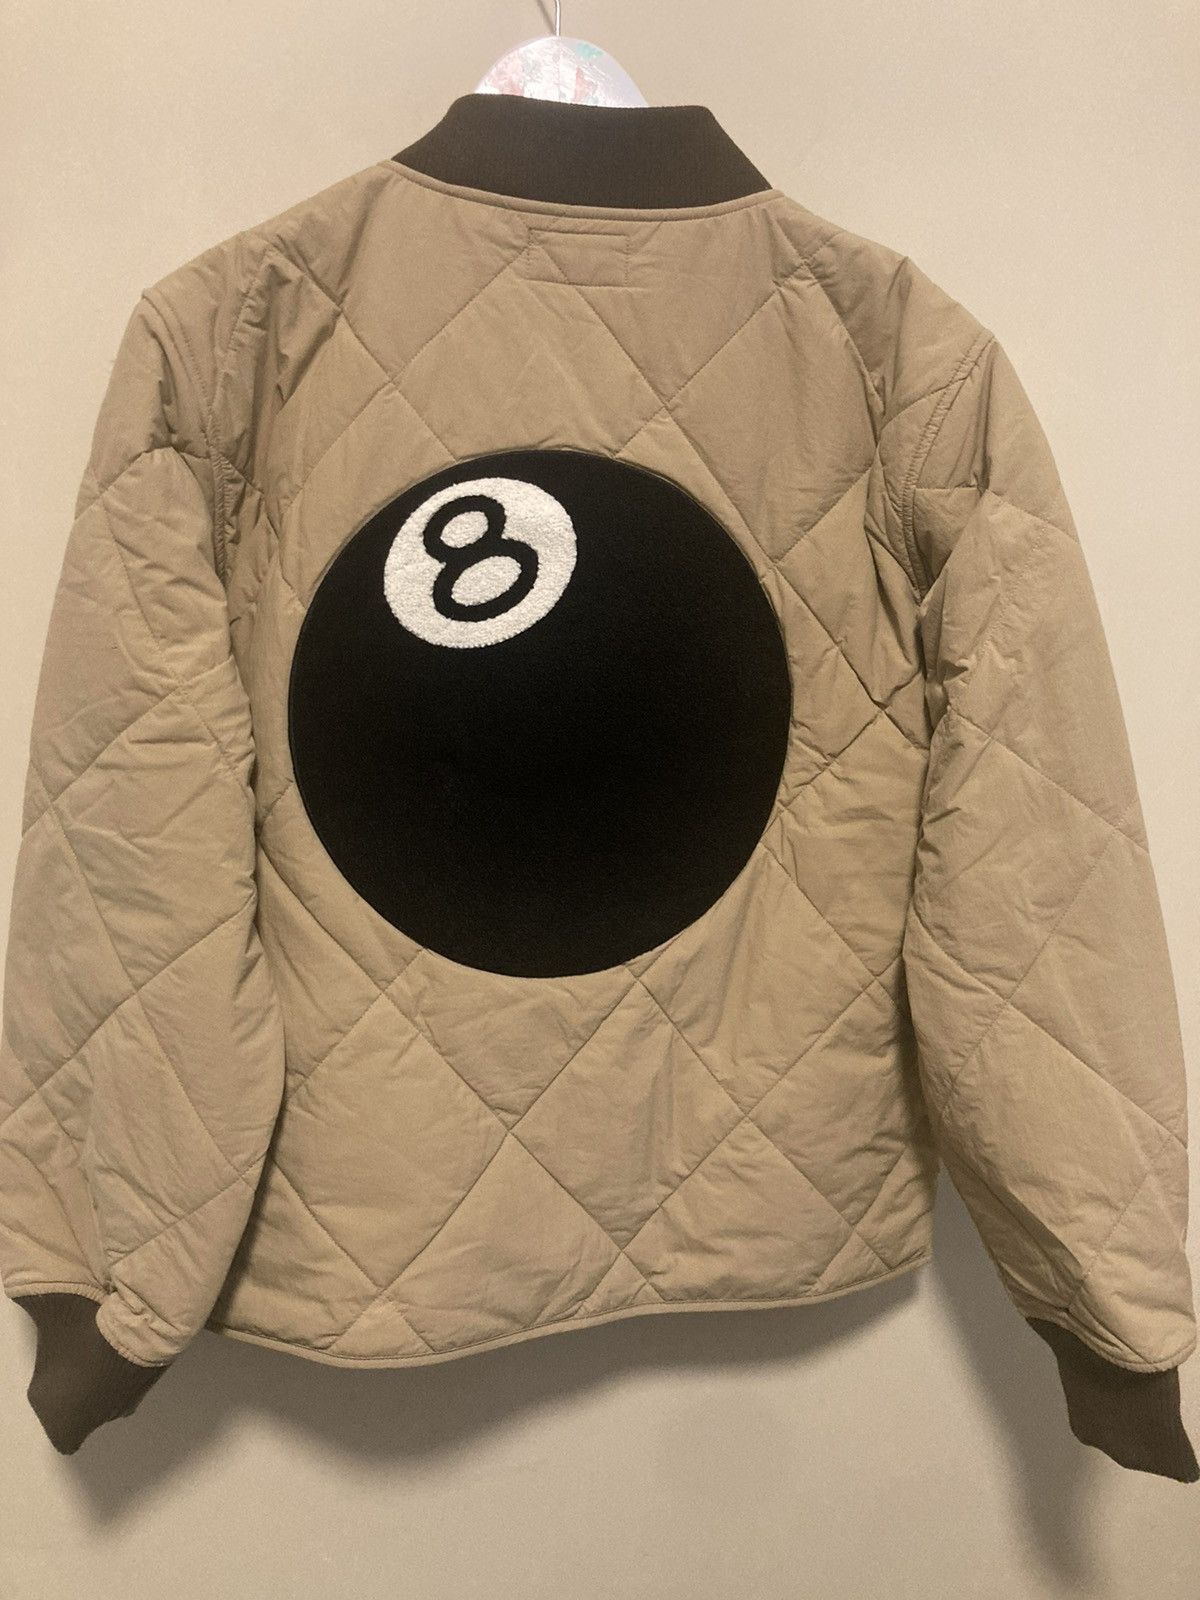 stussySTUSSY 8BALL QUILTED LINER JACKET XL